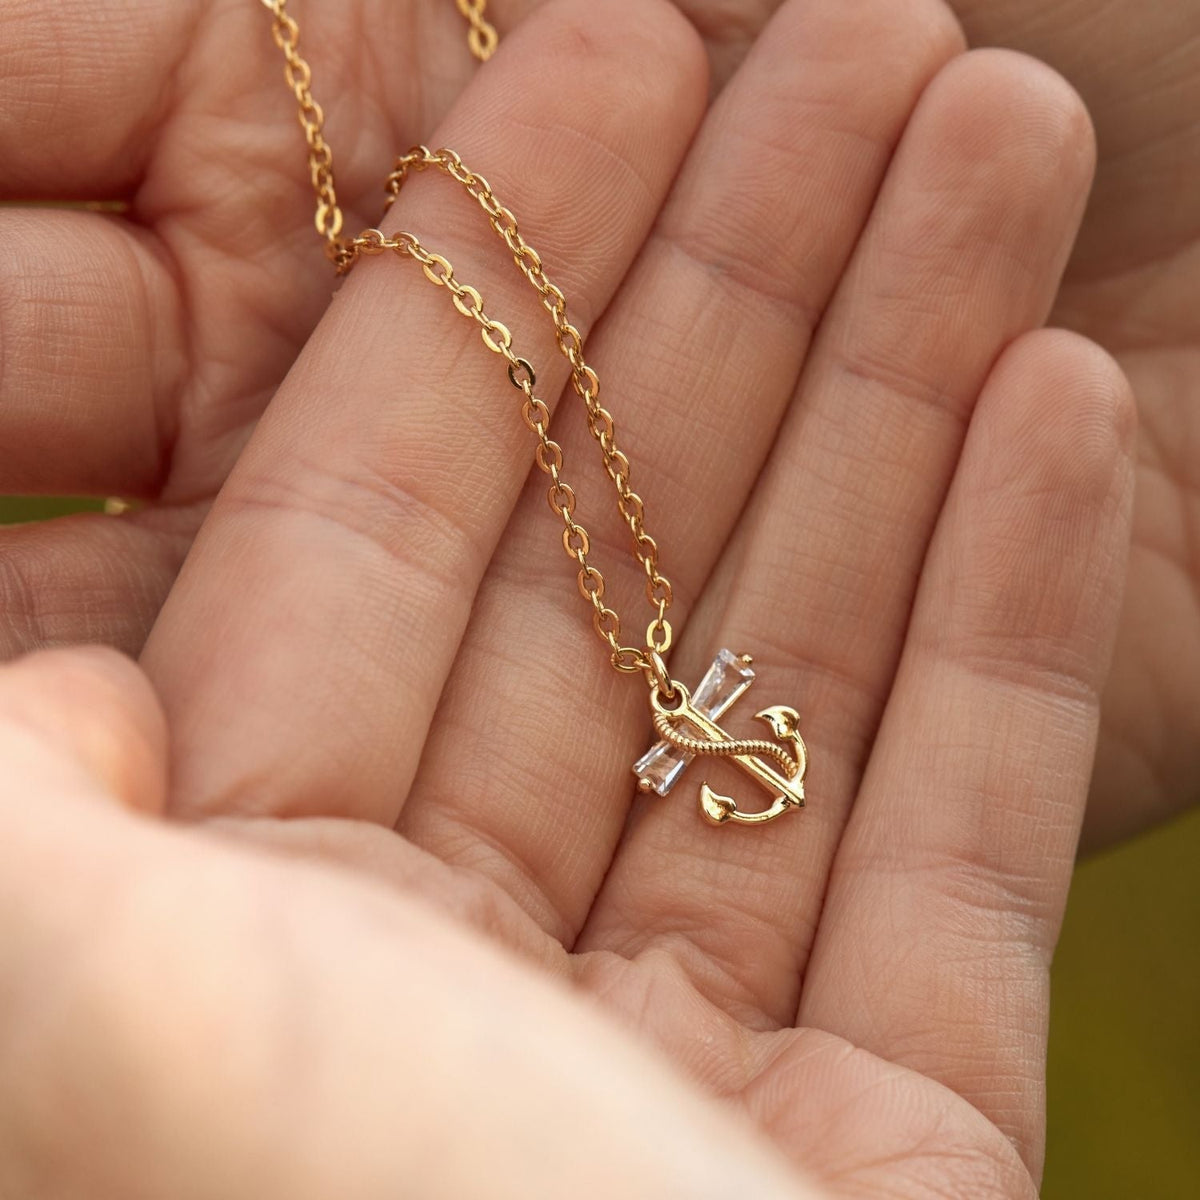 The Bond Between Aunt &amp; Niece | One of My Biggest Blessings | Anchor Necklace